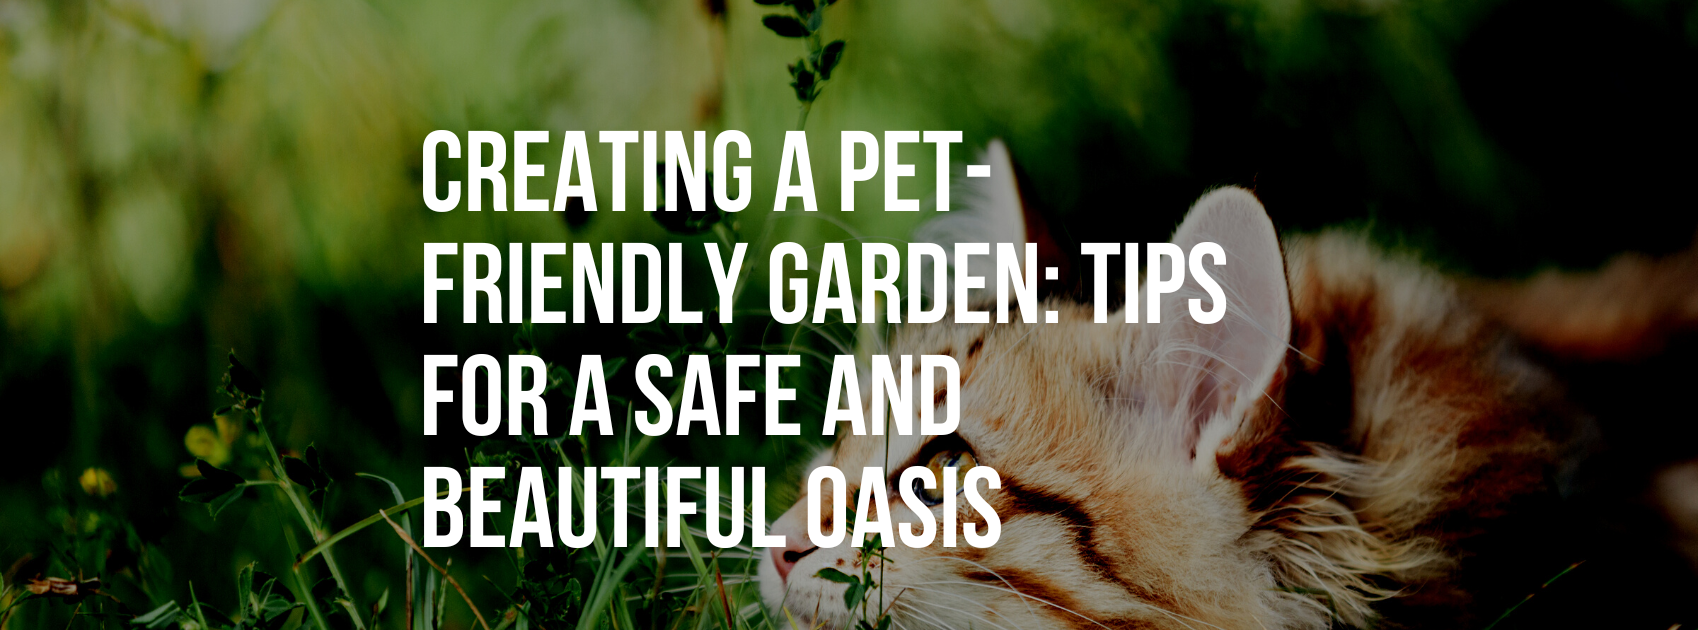 Creating a Pet-Friendly Garden: Tips for a Safe and Beautiful Outdoor Oasis